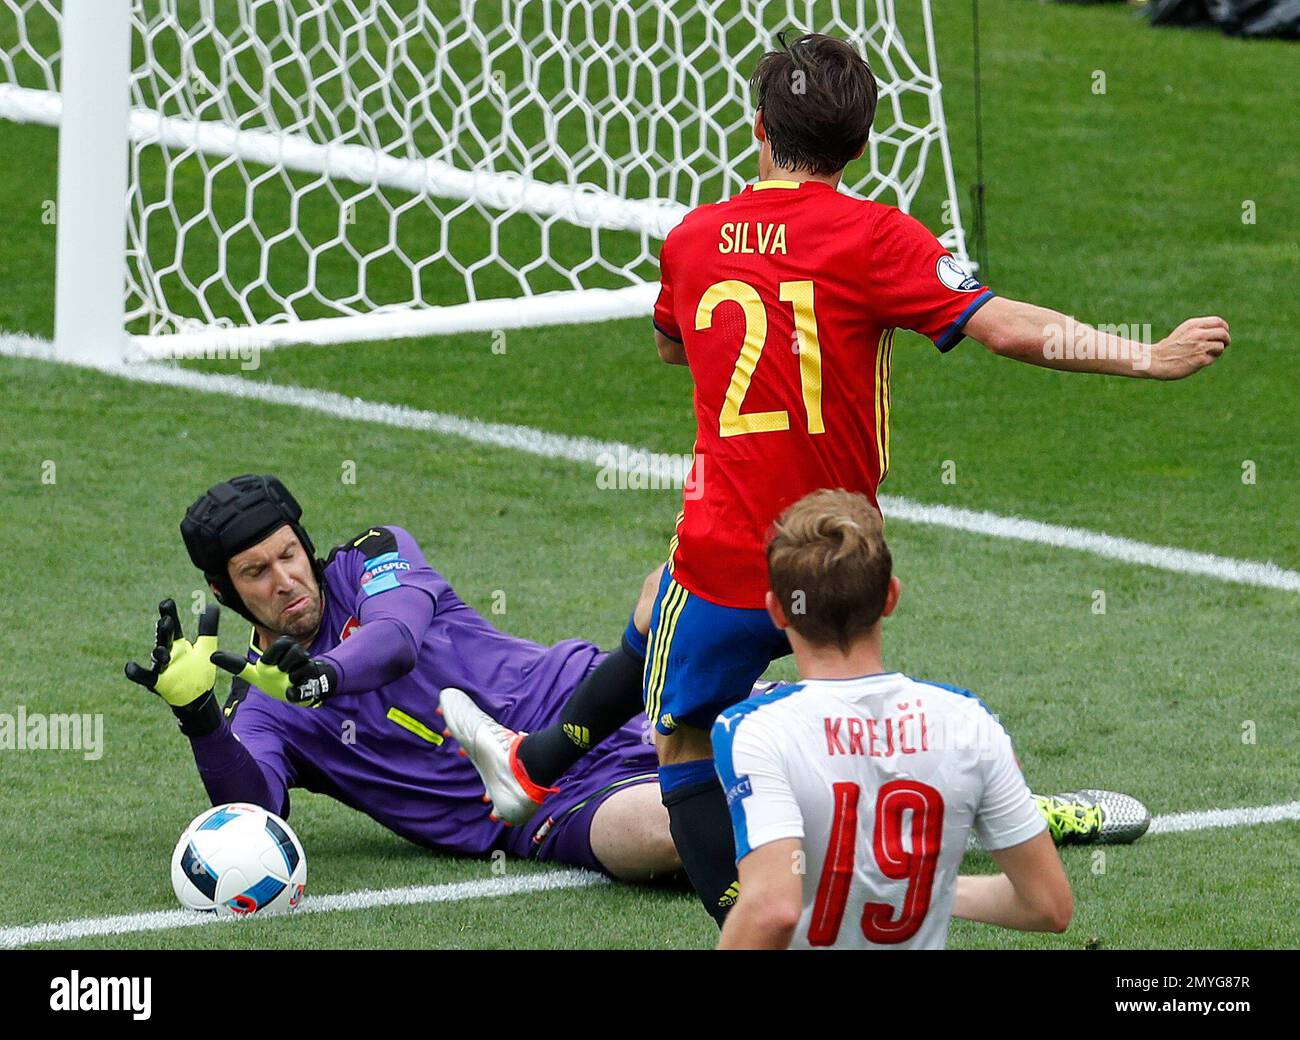 Czech Republic goalkeeper Petr Cech saves at the feet of Spain's David  Silva during the Euro 2016 Group D soccer match between Spain and the Czech  Republic at the Stadium municipal in